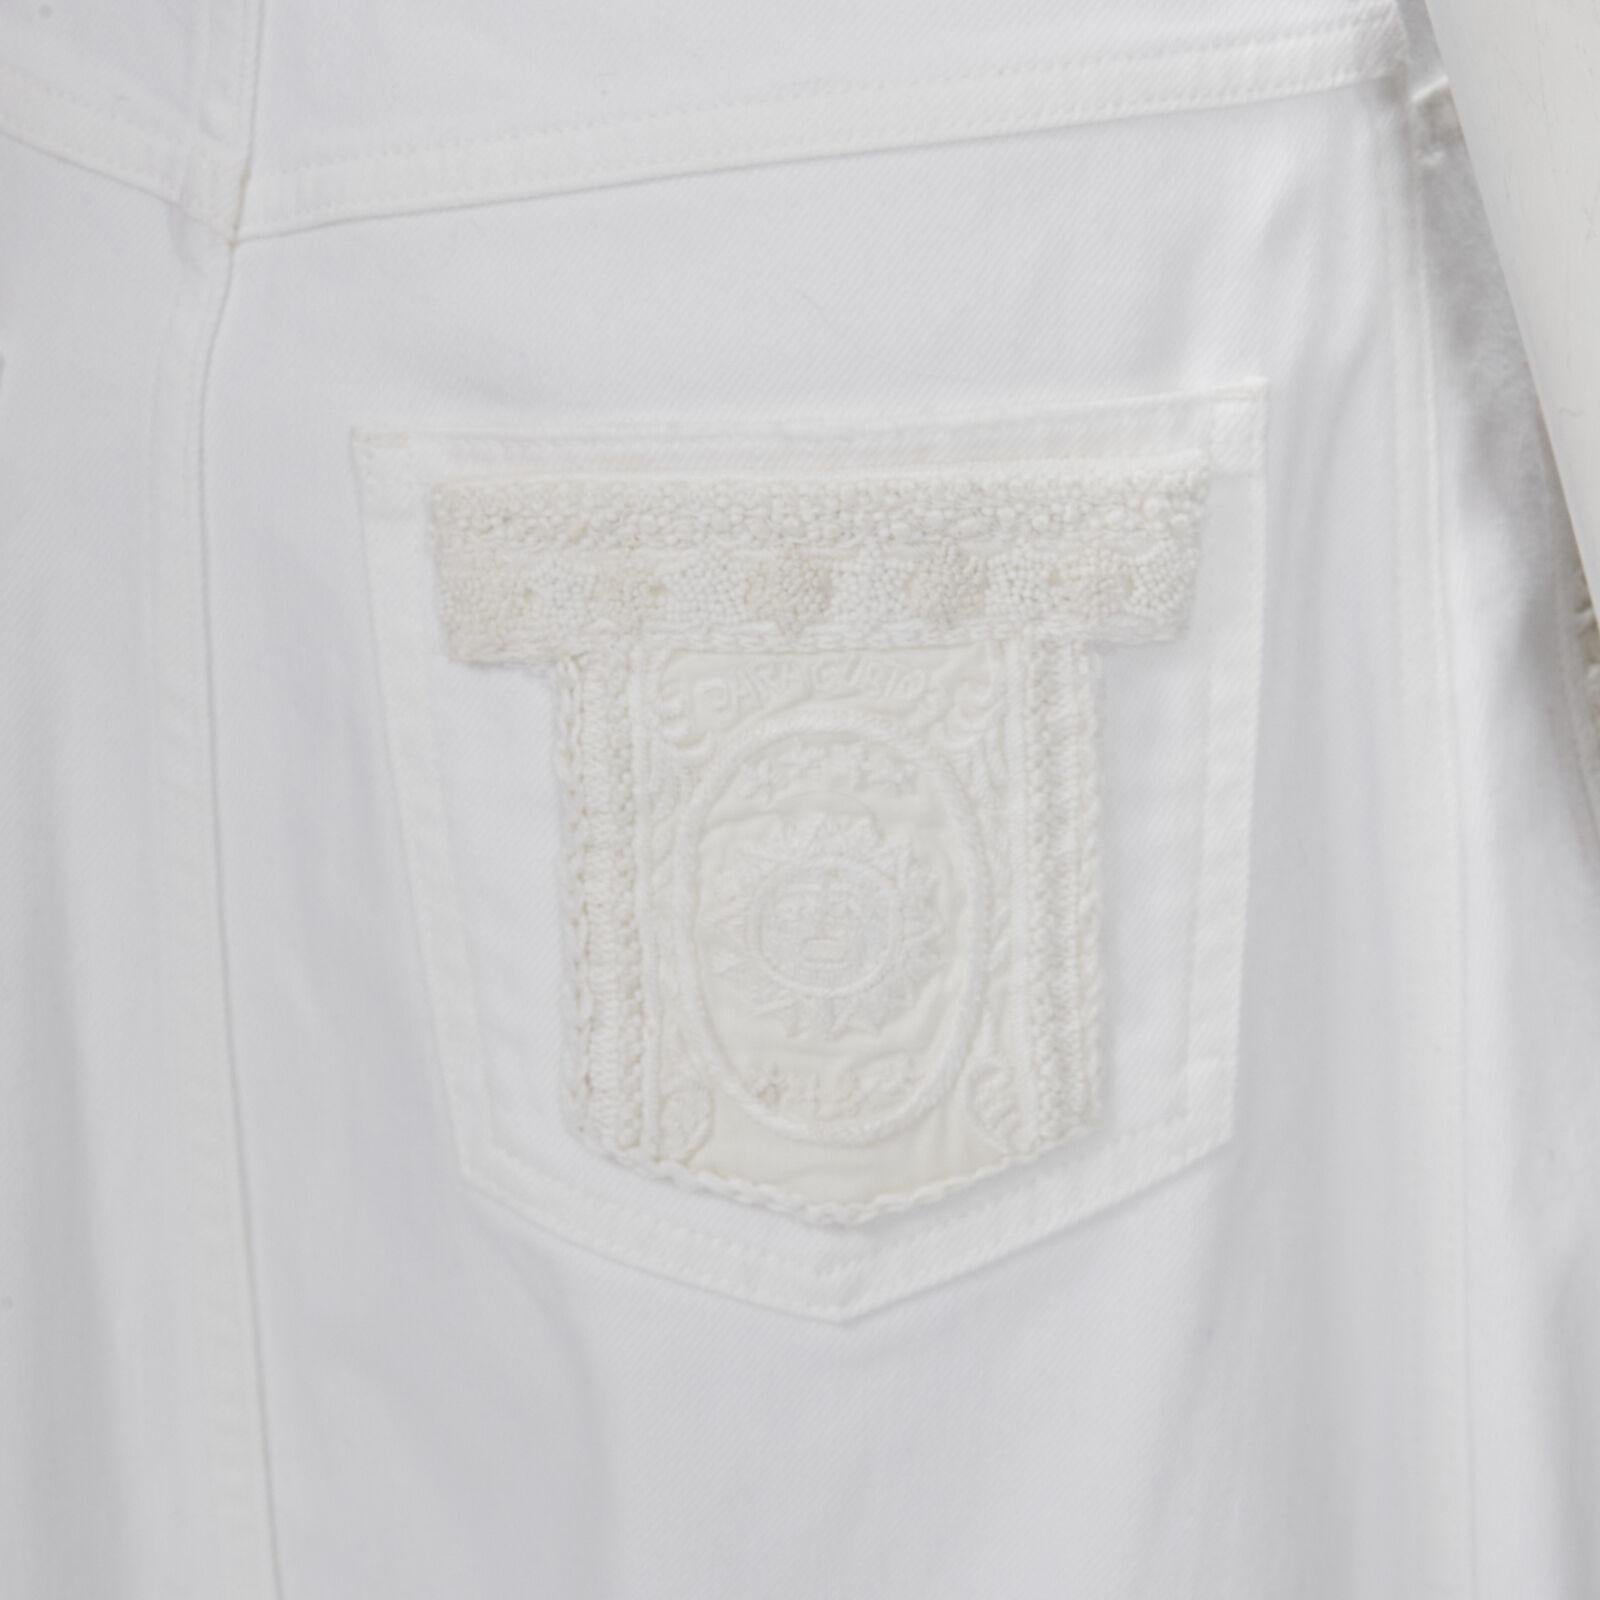 VALENTINO white denim butterfly bead embellished patch raw midi skirt IT38 XS
Reference: KNLM/A00207
Brand: Valentino
Designer: Pier Paolo Piccioli
Material: Cotton
Color: White
Pattern: Solid
Closure: Button
Lining: Unlined
Extra Details: 5-pocket